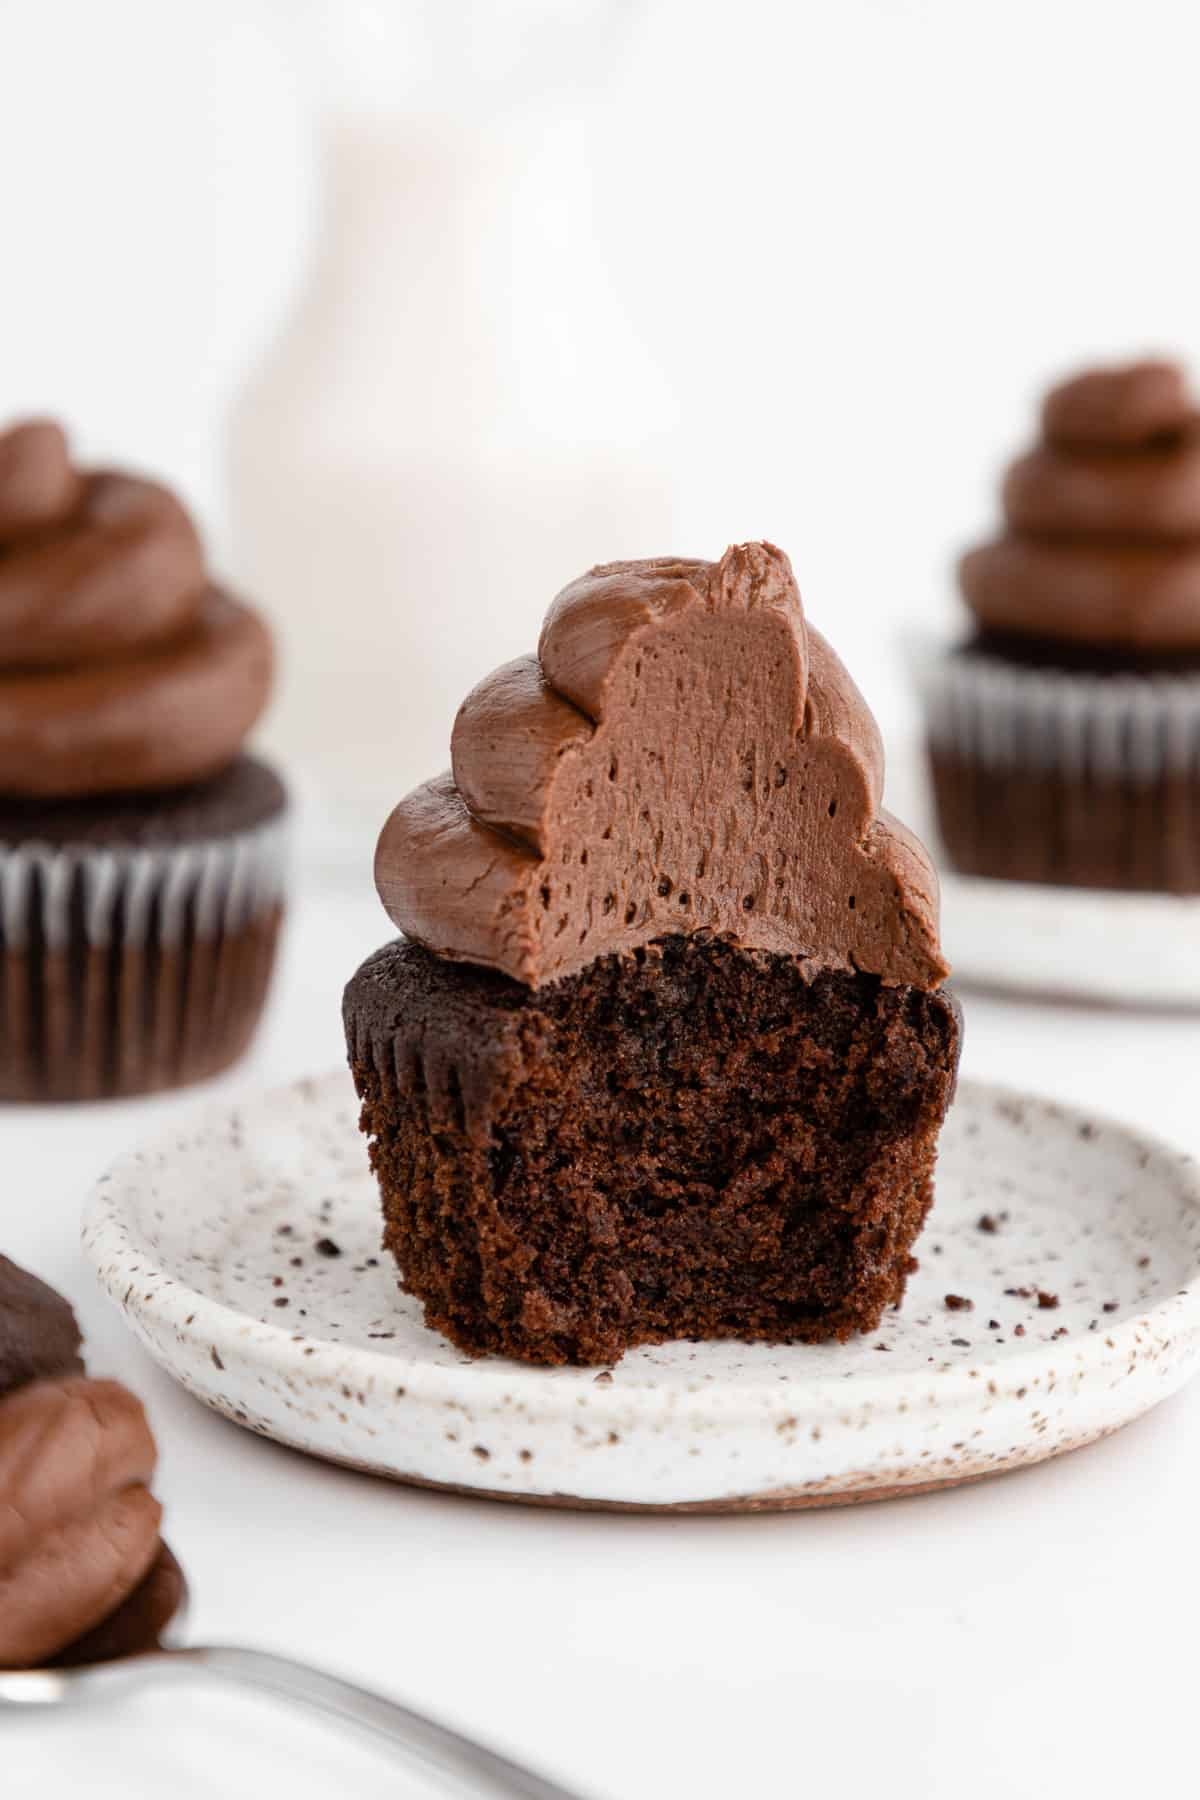 a partially eaten vegan chocolate cupcake with chocolate buttercream frosting sitting on a ceramic dessert plate, surrounded by a glass of almond milk and additional cupcakes